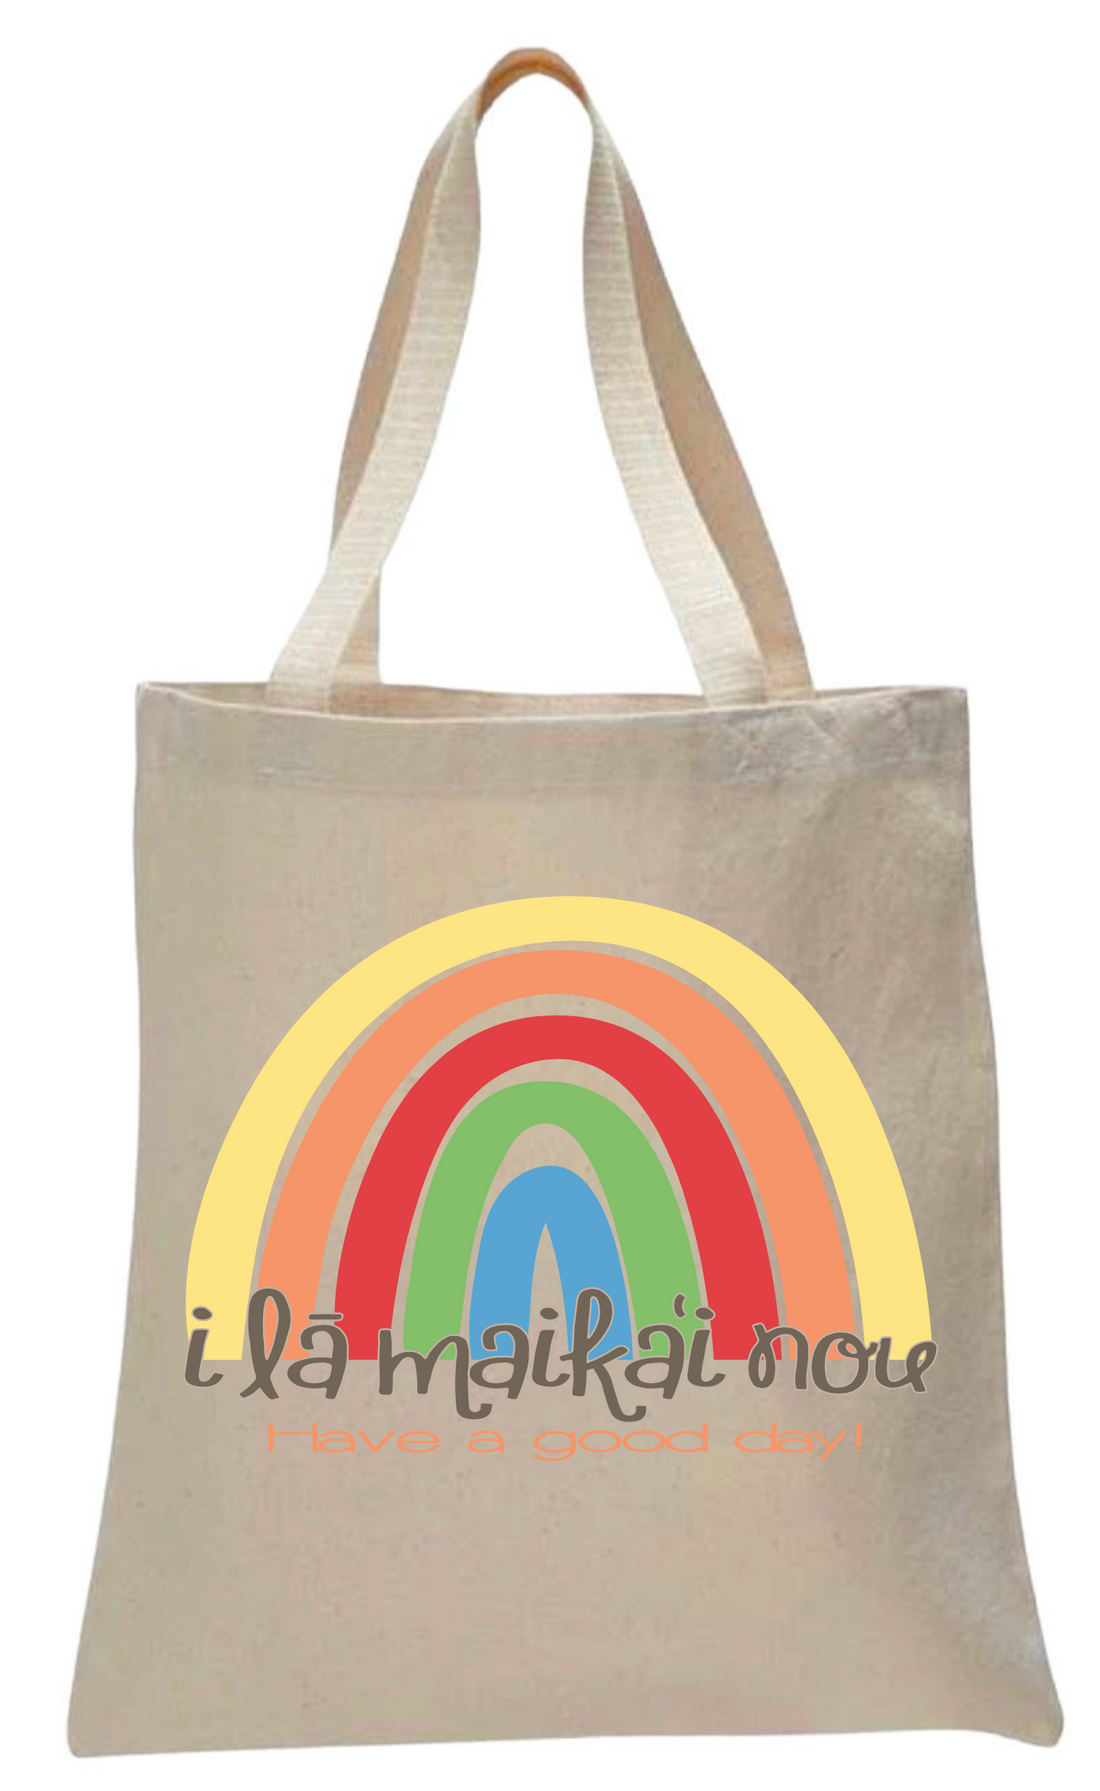 HAVE A GOOD DAY CANVAS TOTE BAG